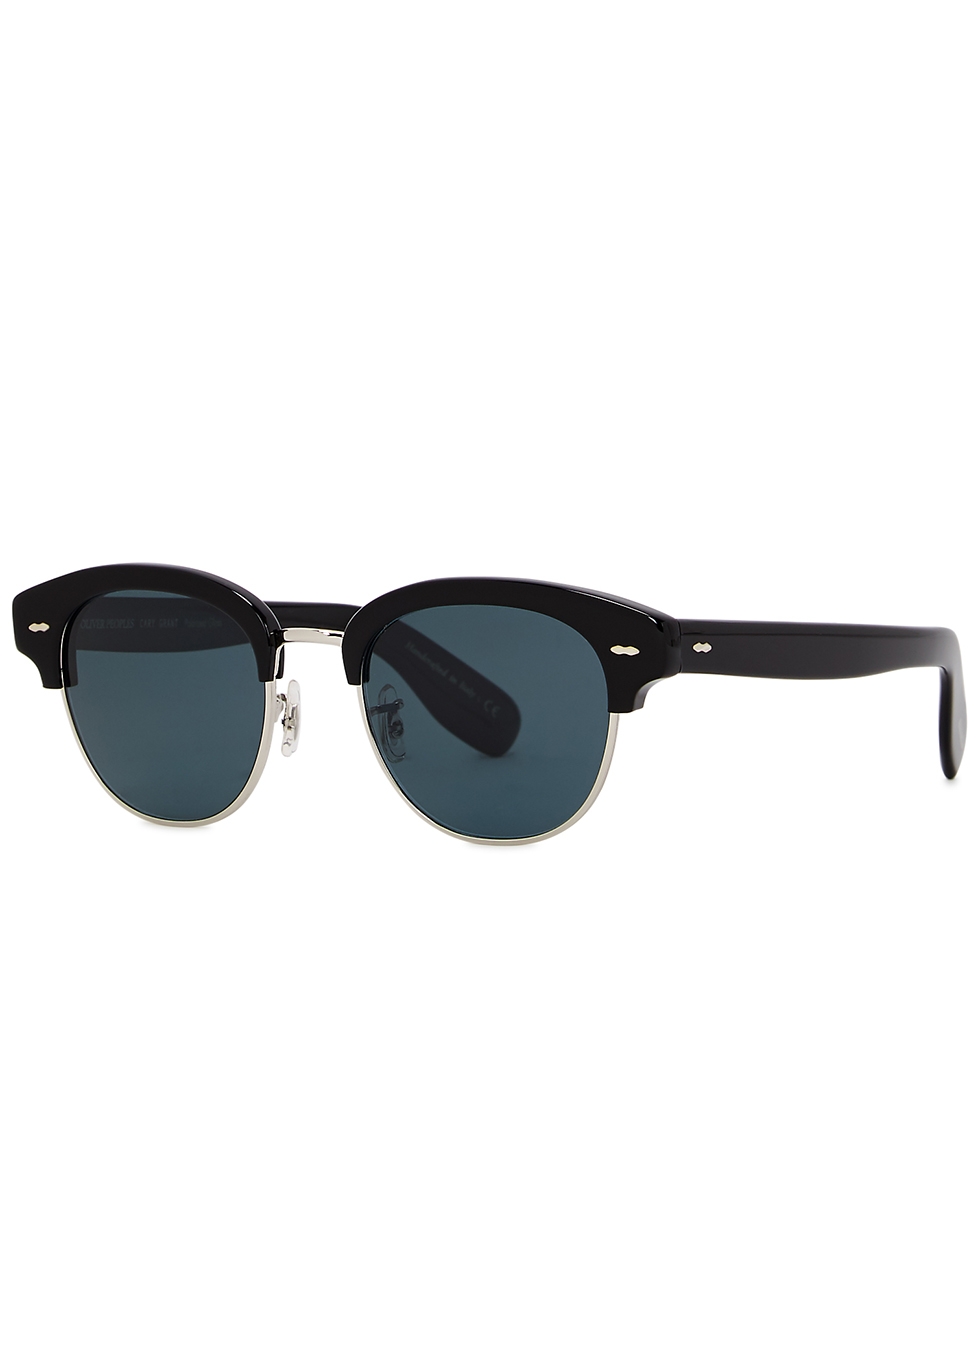 Oliver Peoples Cary Grant 2 Sun 